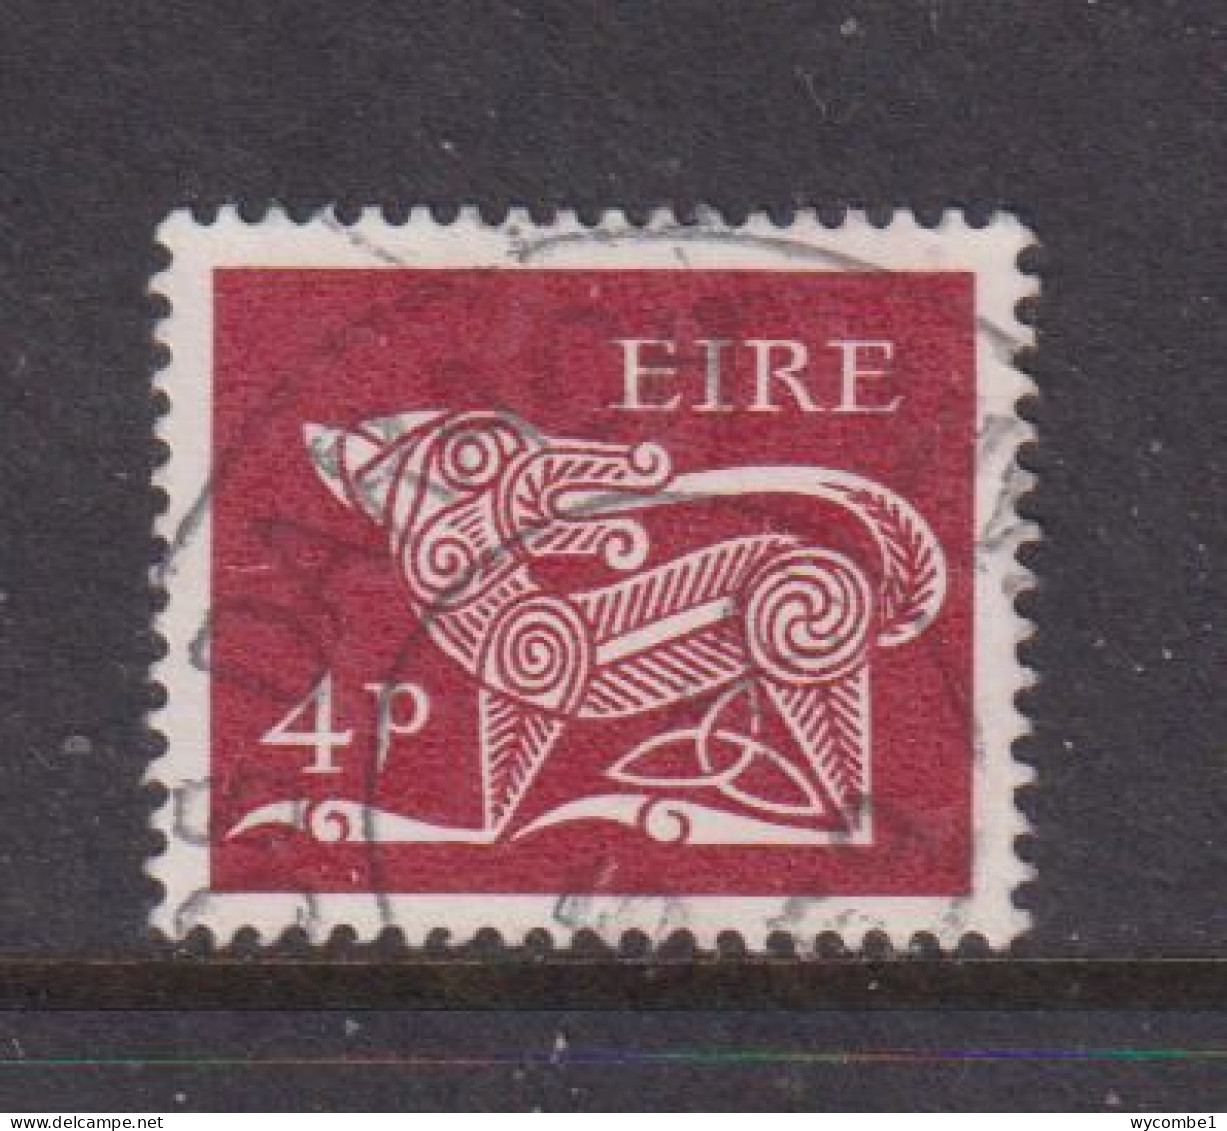 IRELAND - 1968  Definitives  4d  Used As Scan - Used Stamps